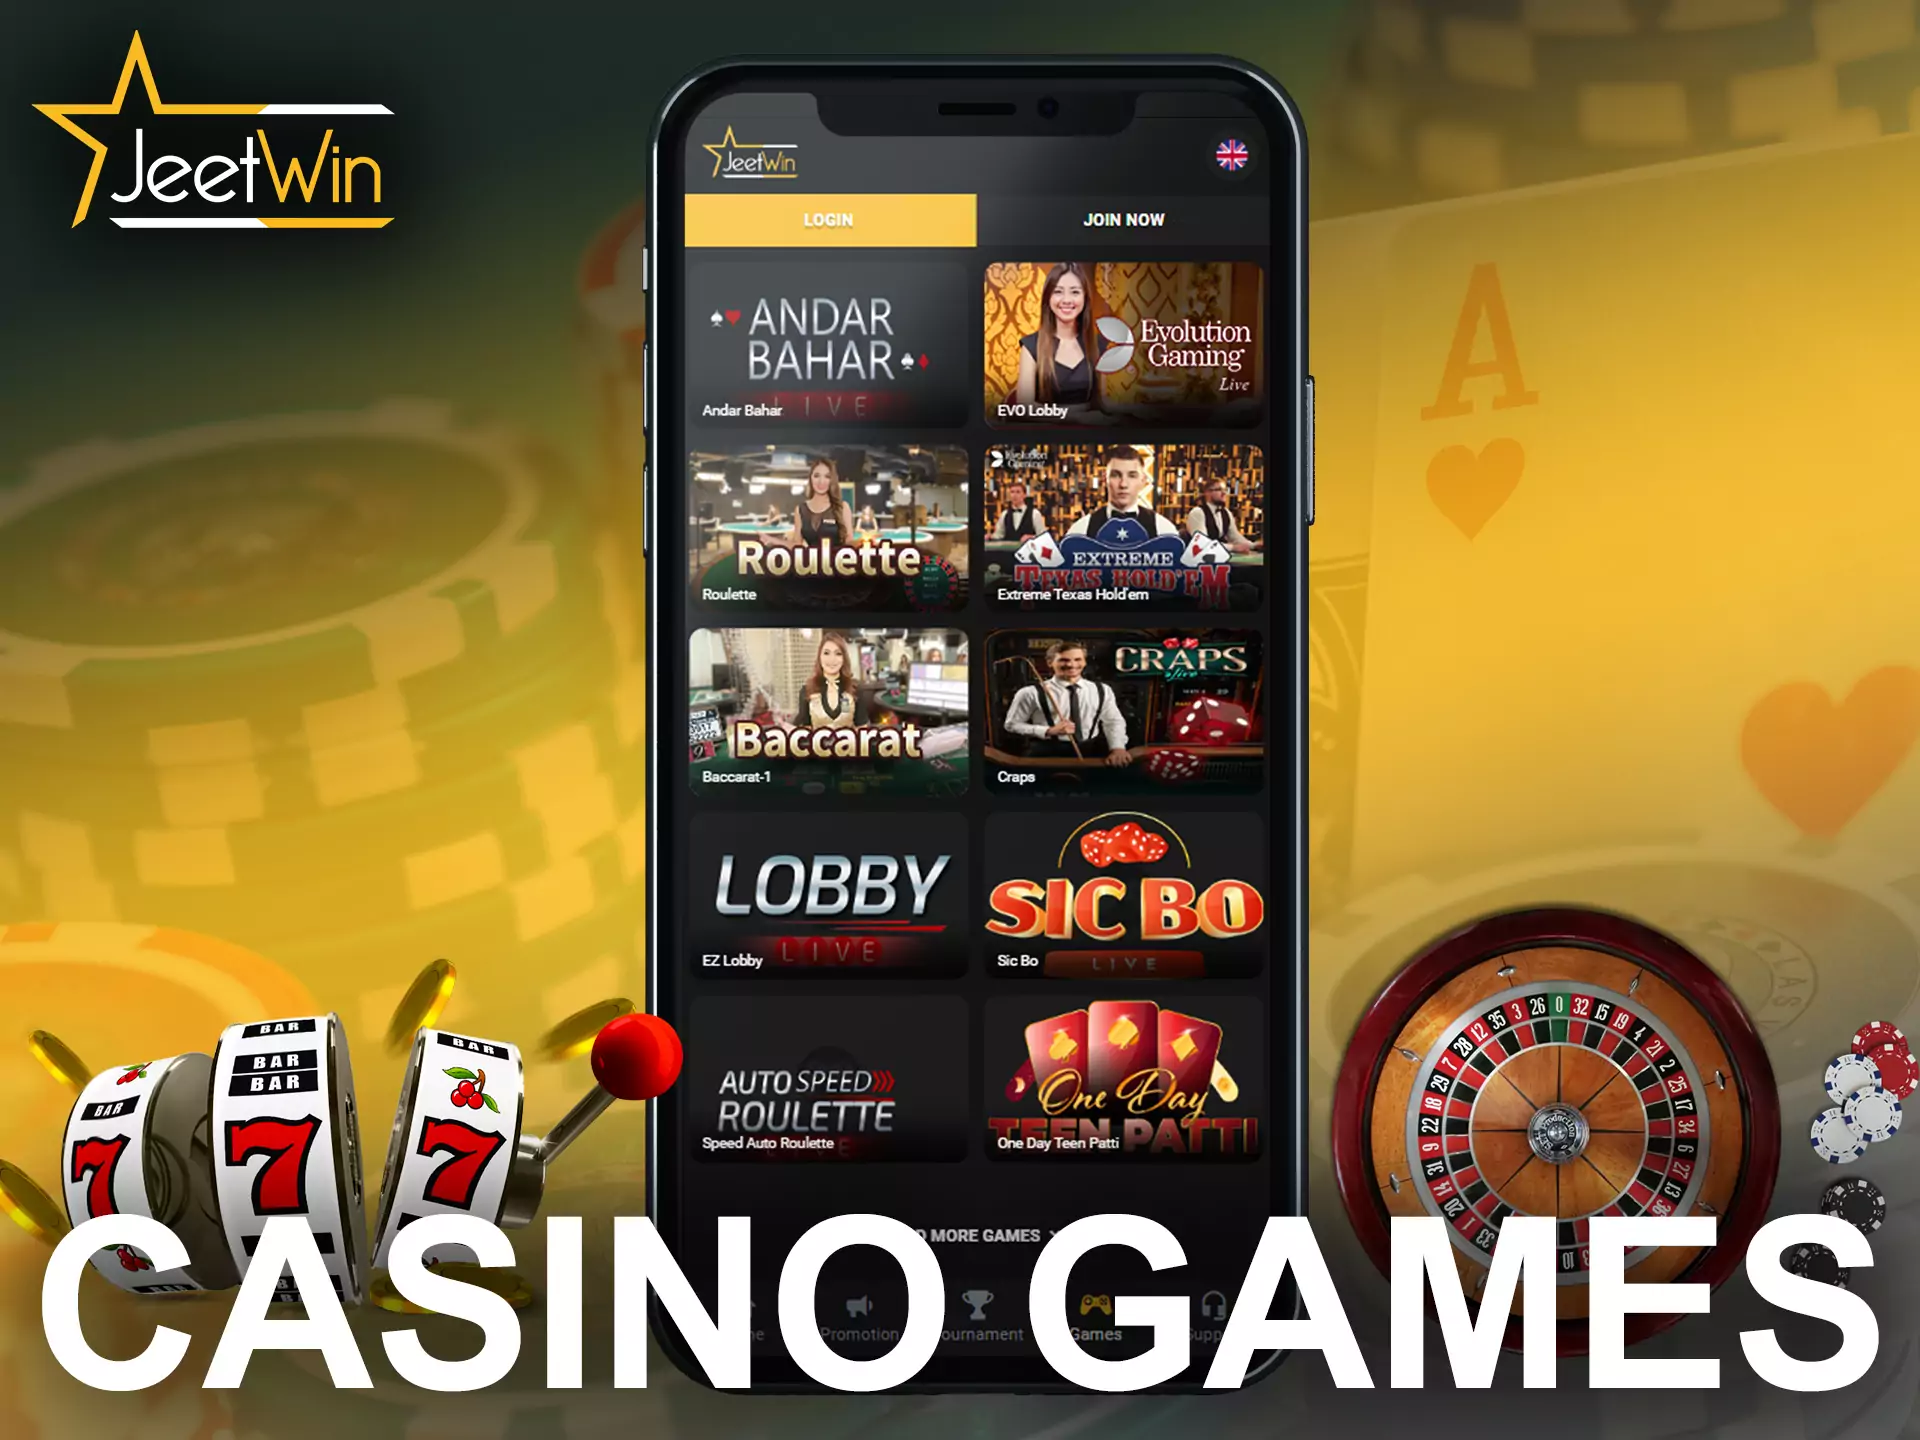 Try different games at JeetWin Casino.